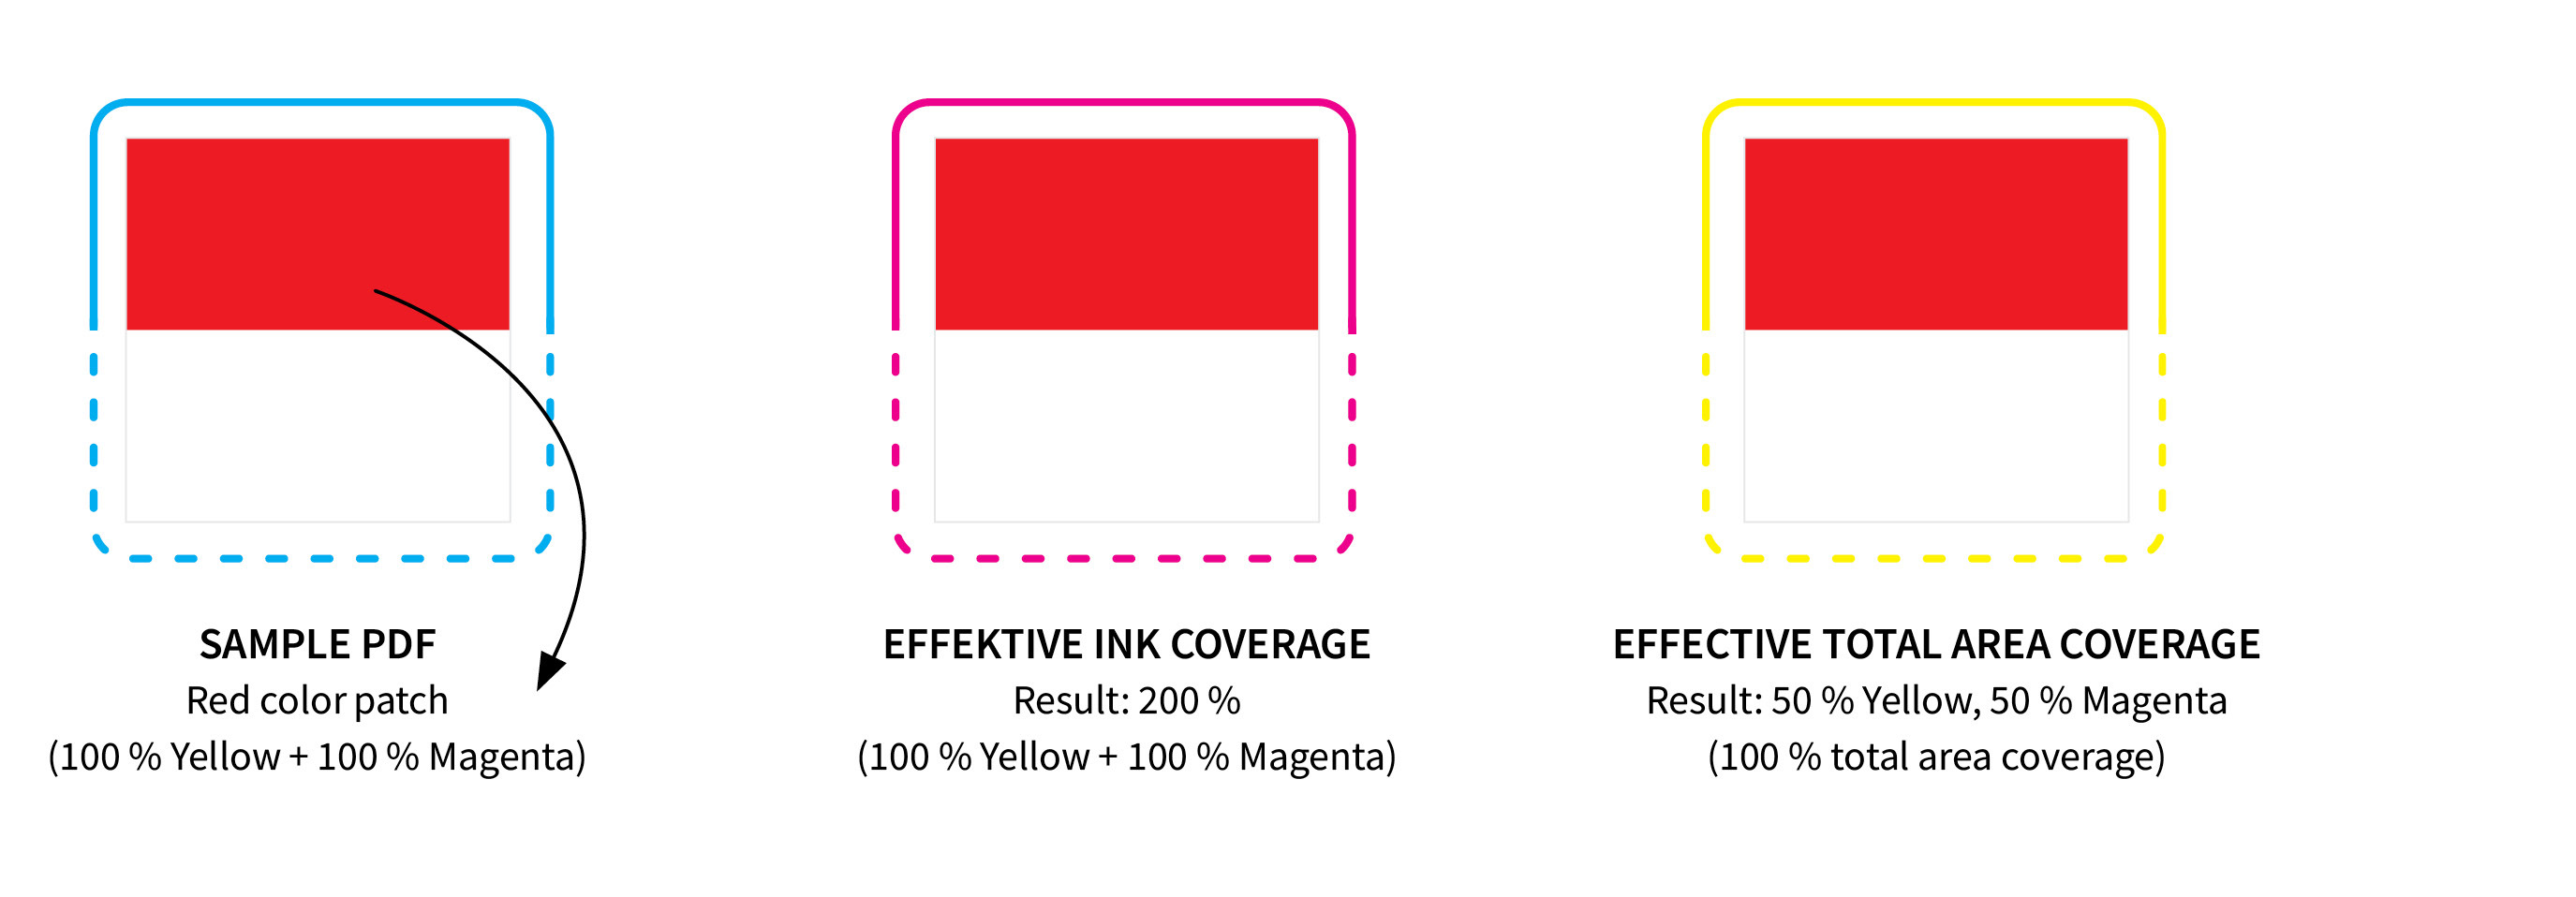 Infographic comparison of Effective ink coverage and Effective total area coverage